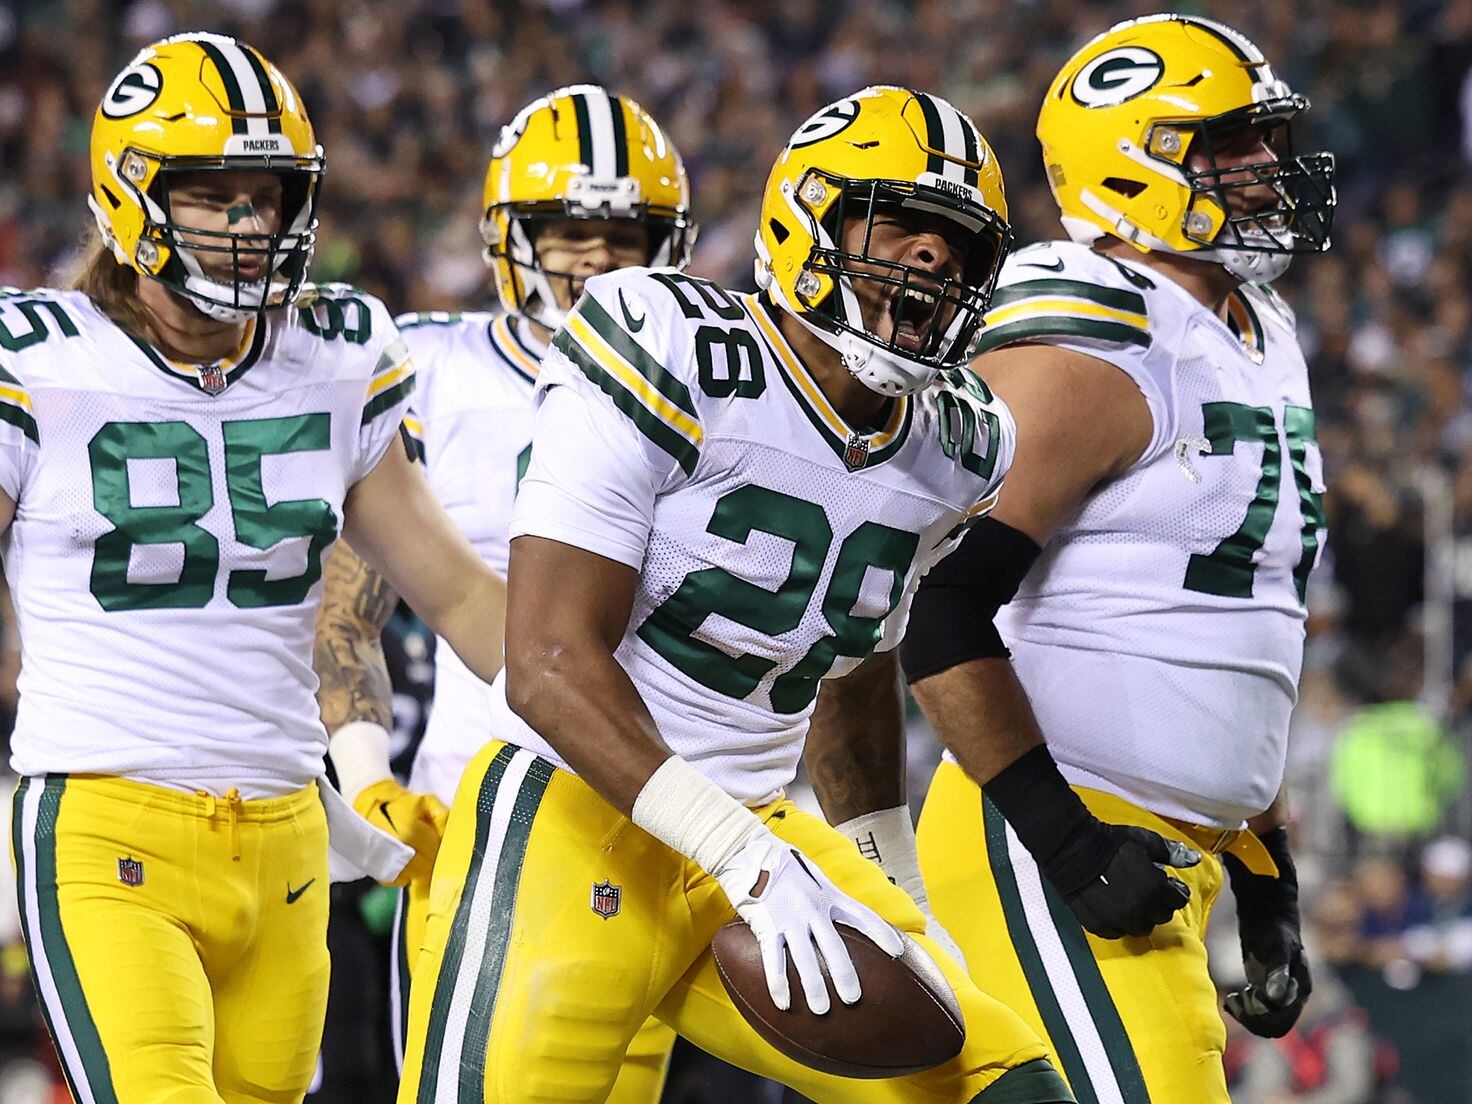 Green Bay Packers Playoffs and Super Bowl Odds